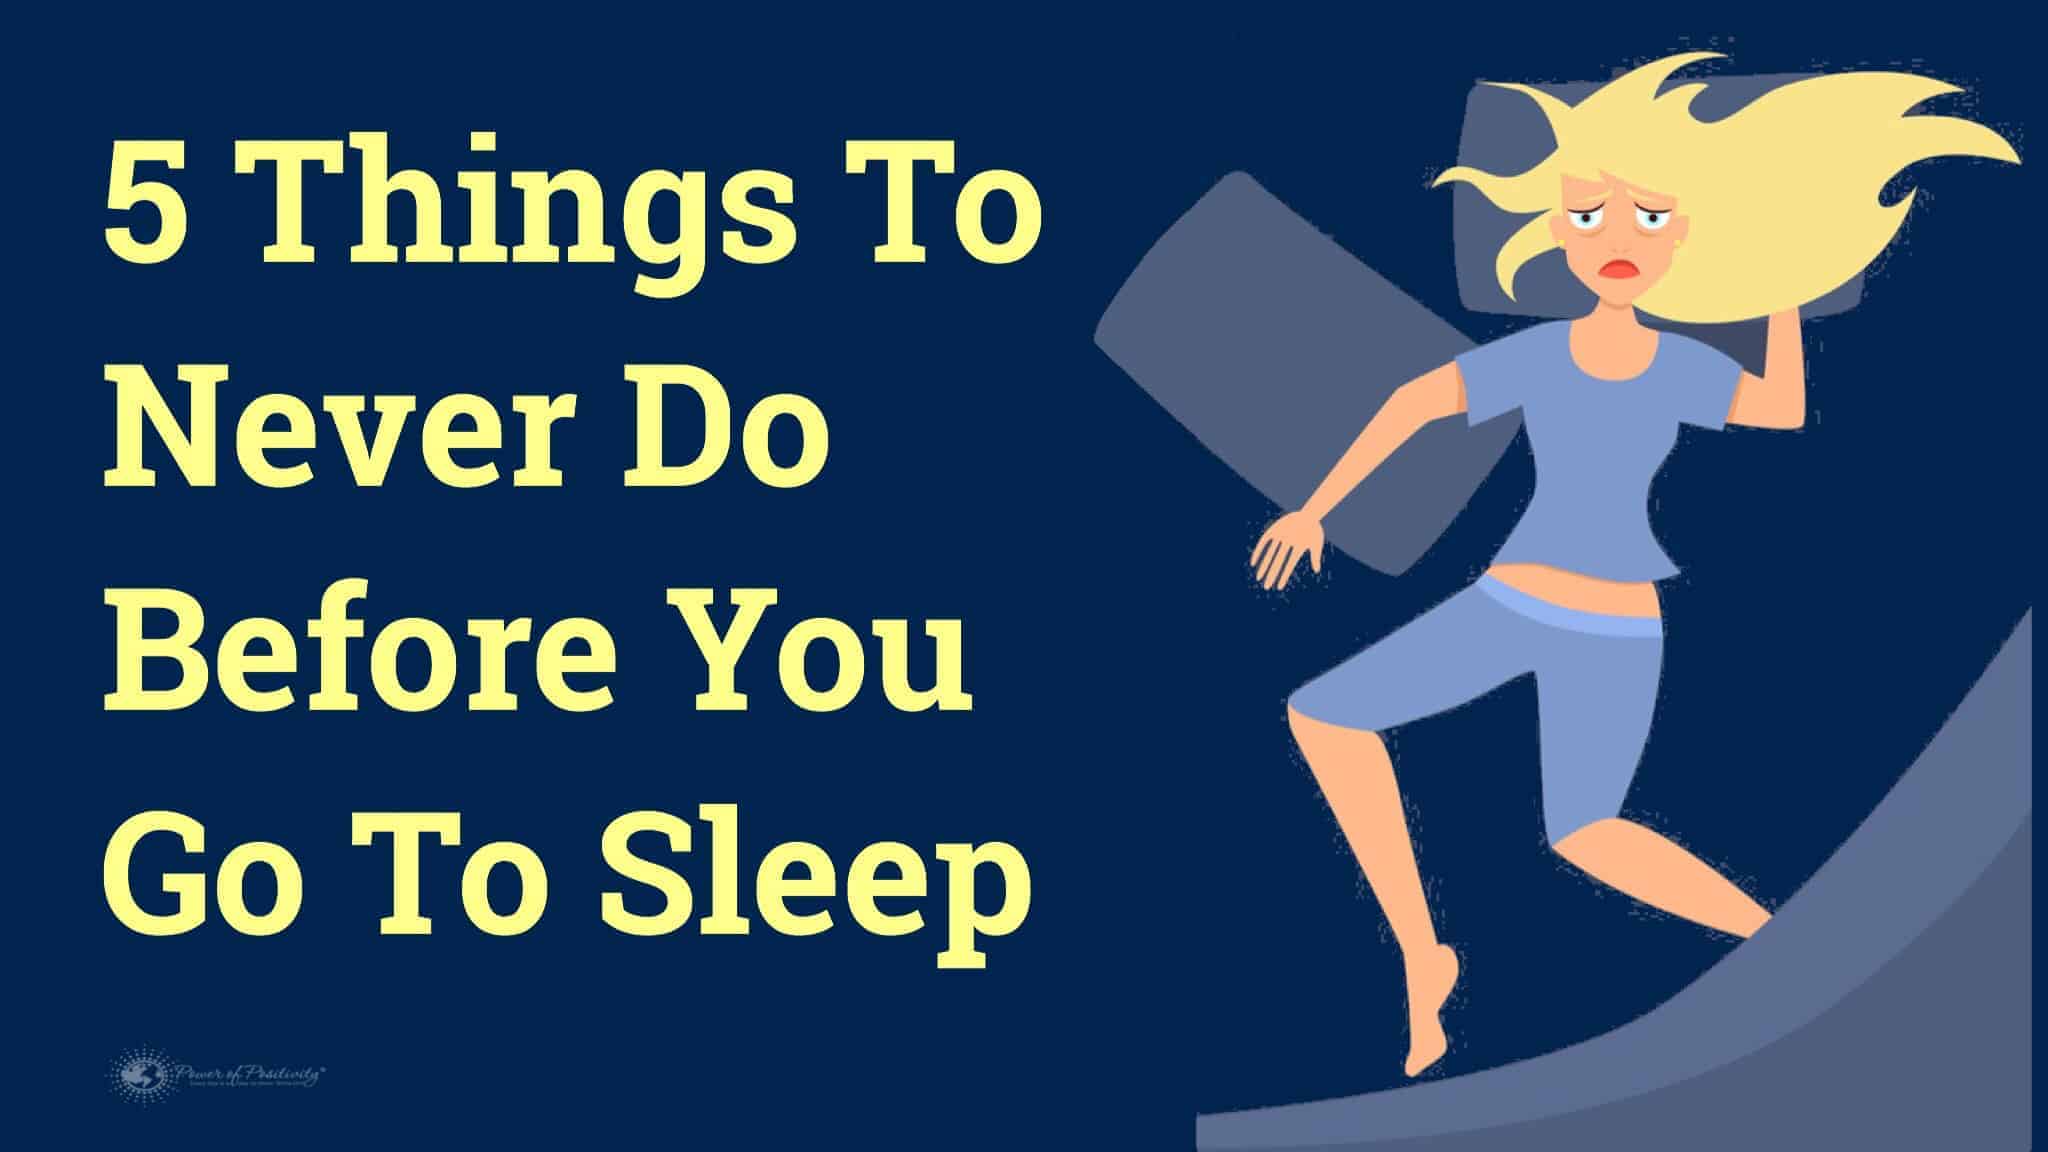 5 Things To Never Do Before You Go To Sleep